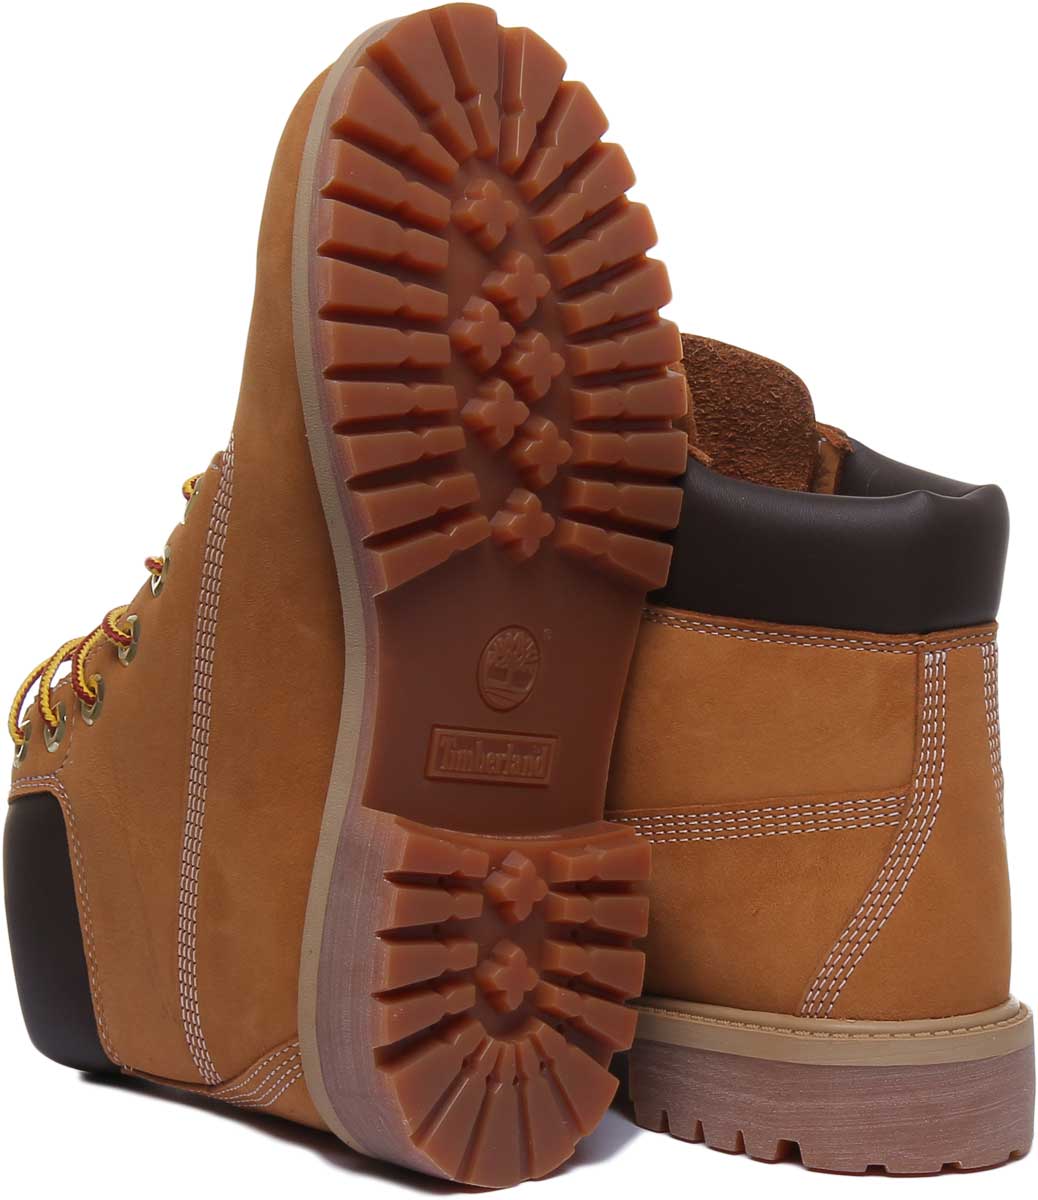 Timberland 6 Inch Ankle Boots In Wheat For Youth